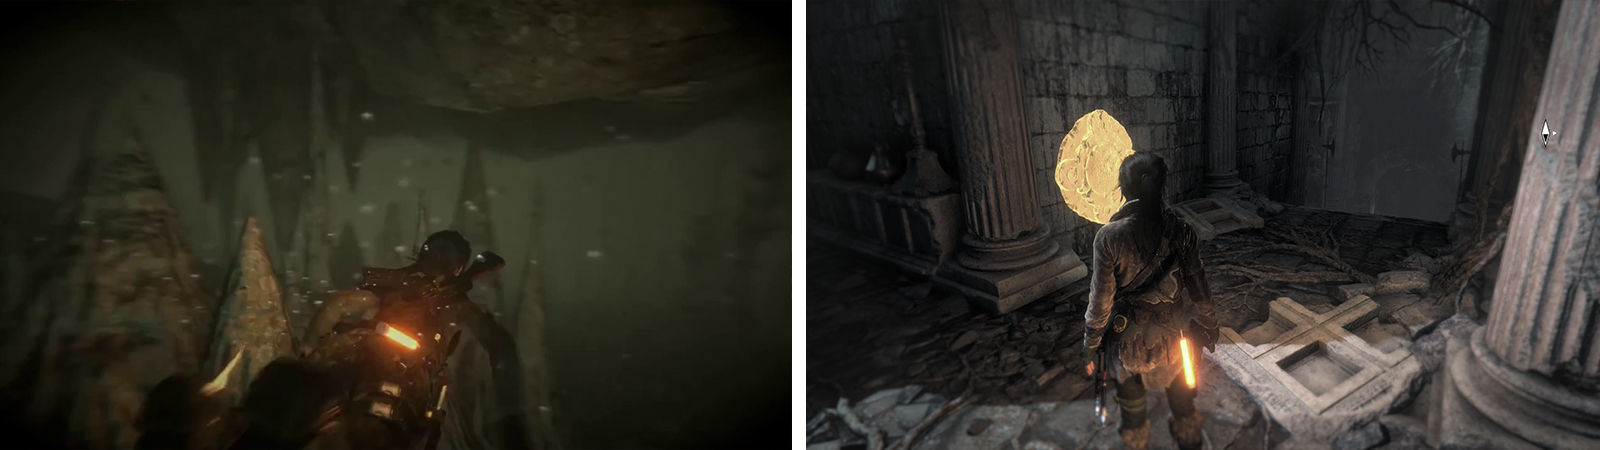 Swim through the underwater tunnels until you can surface (left). Here you can find Strongbox 01 and Mural 02 (right).